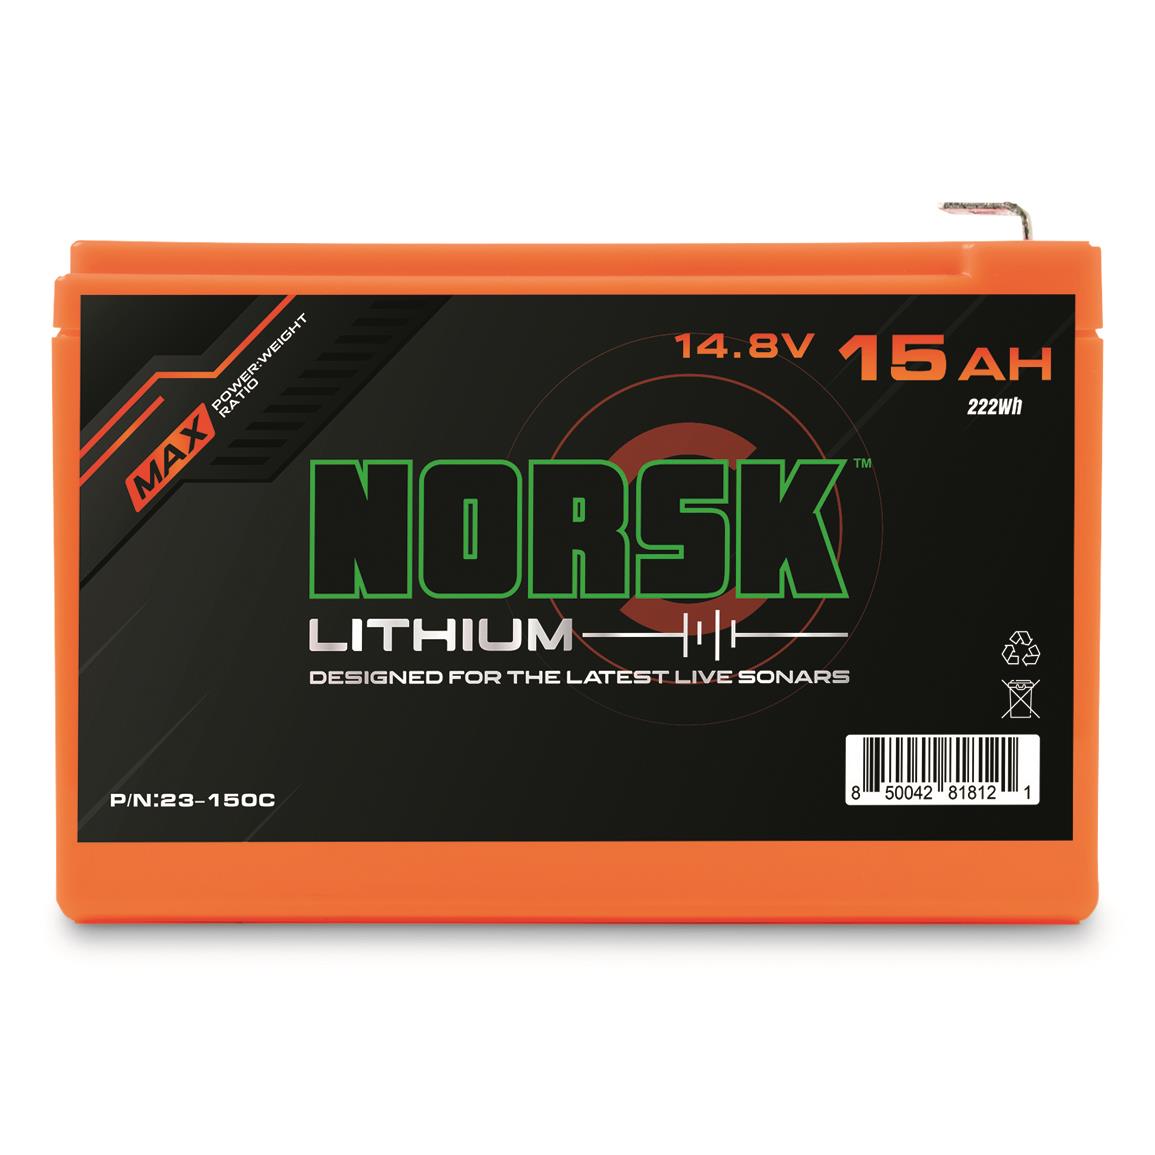 Norsk 14.8V 15Ah Lithium-Ion Battery with Charger